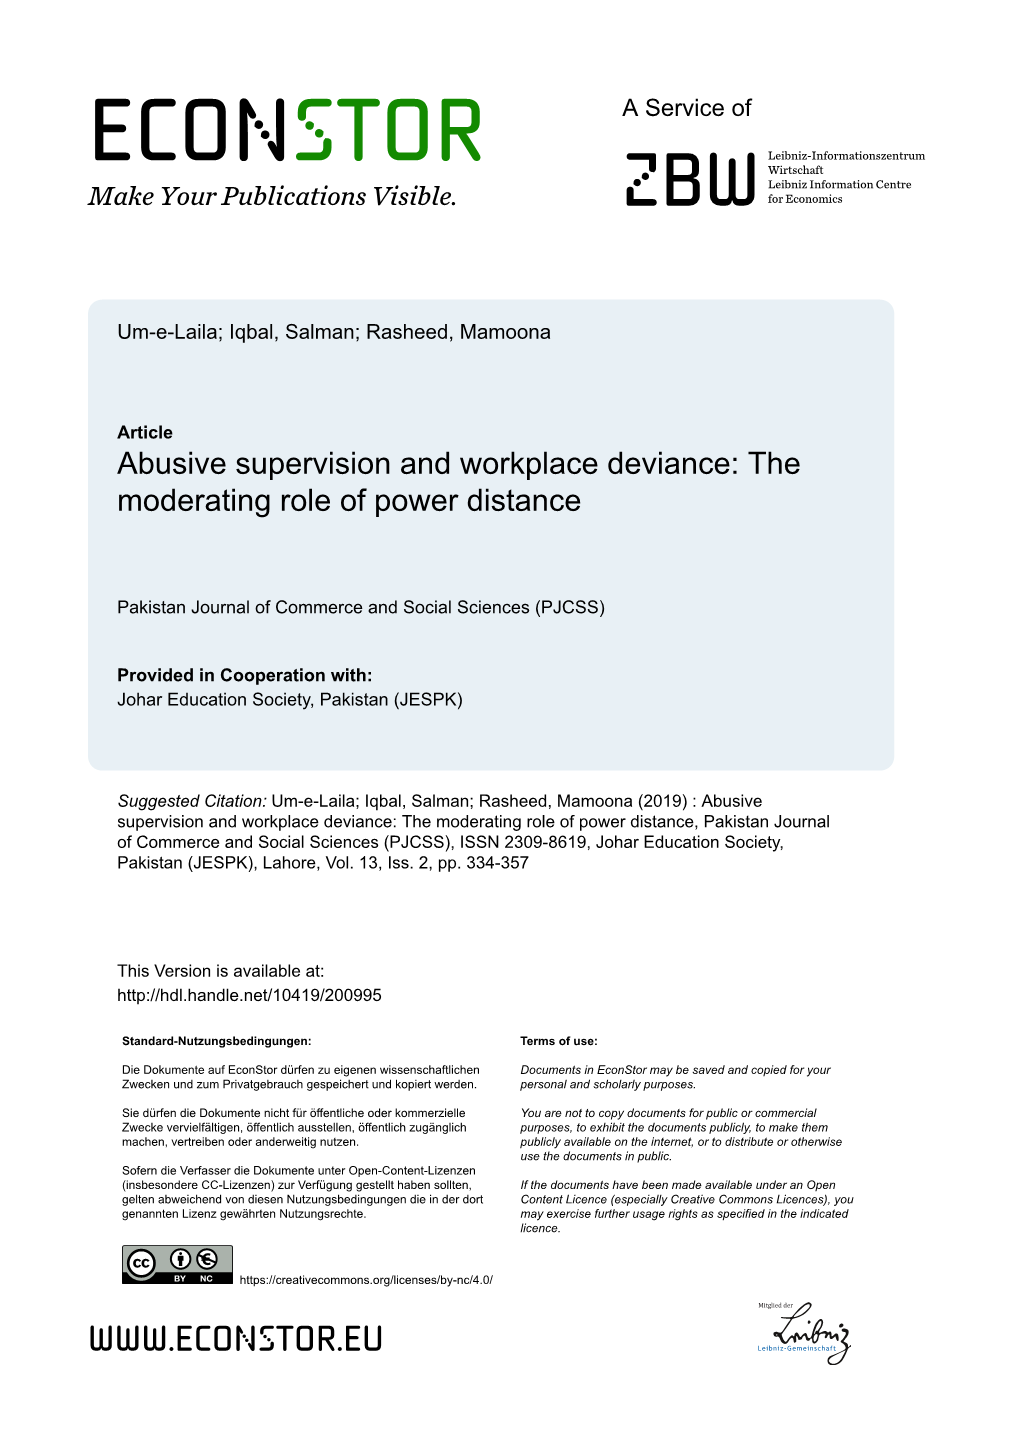 Abusive Supervision and Workplace Deviance: the Moderating Role of Power Distance